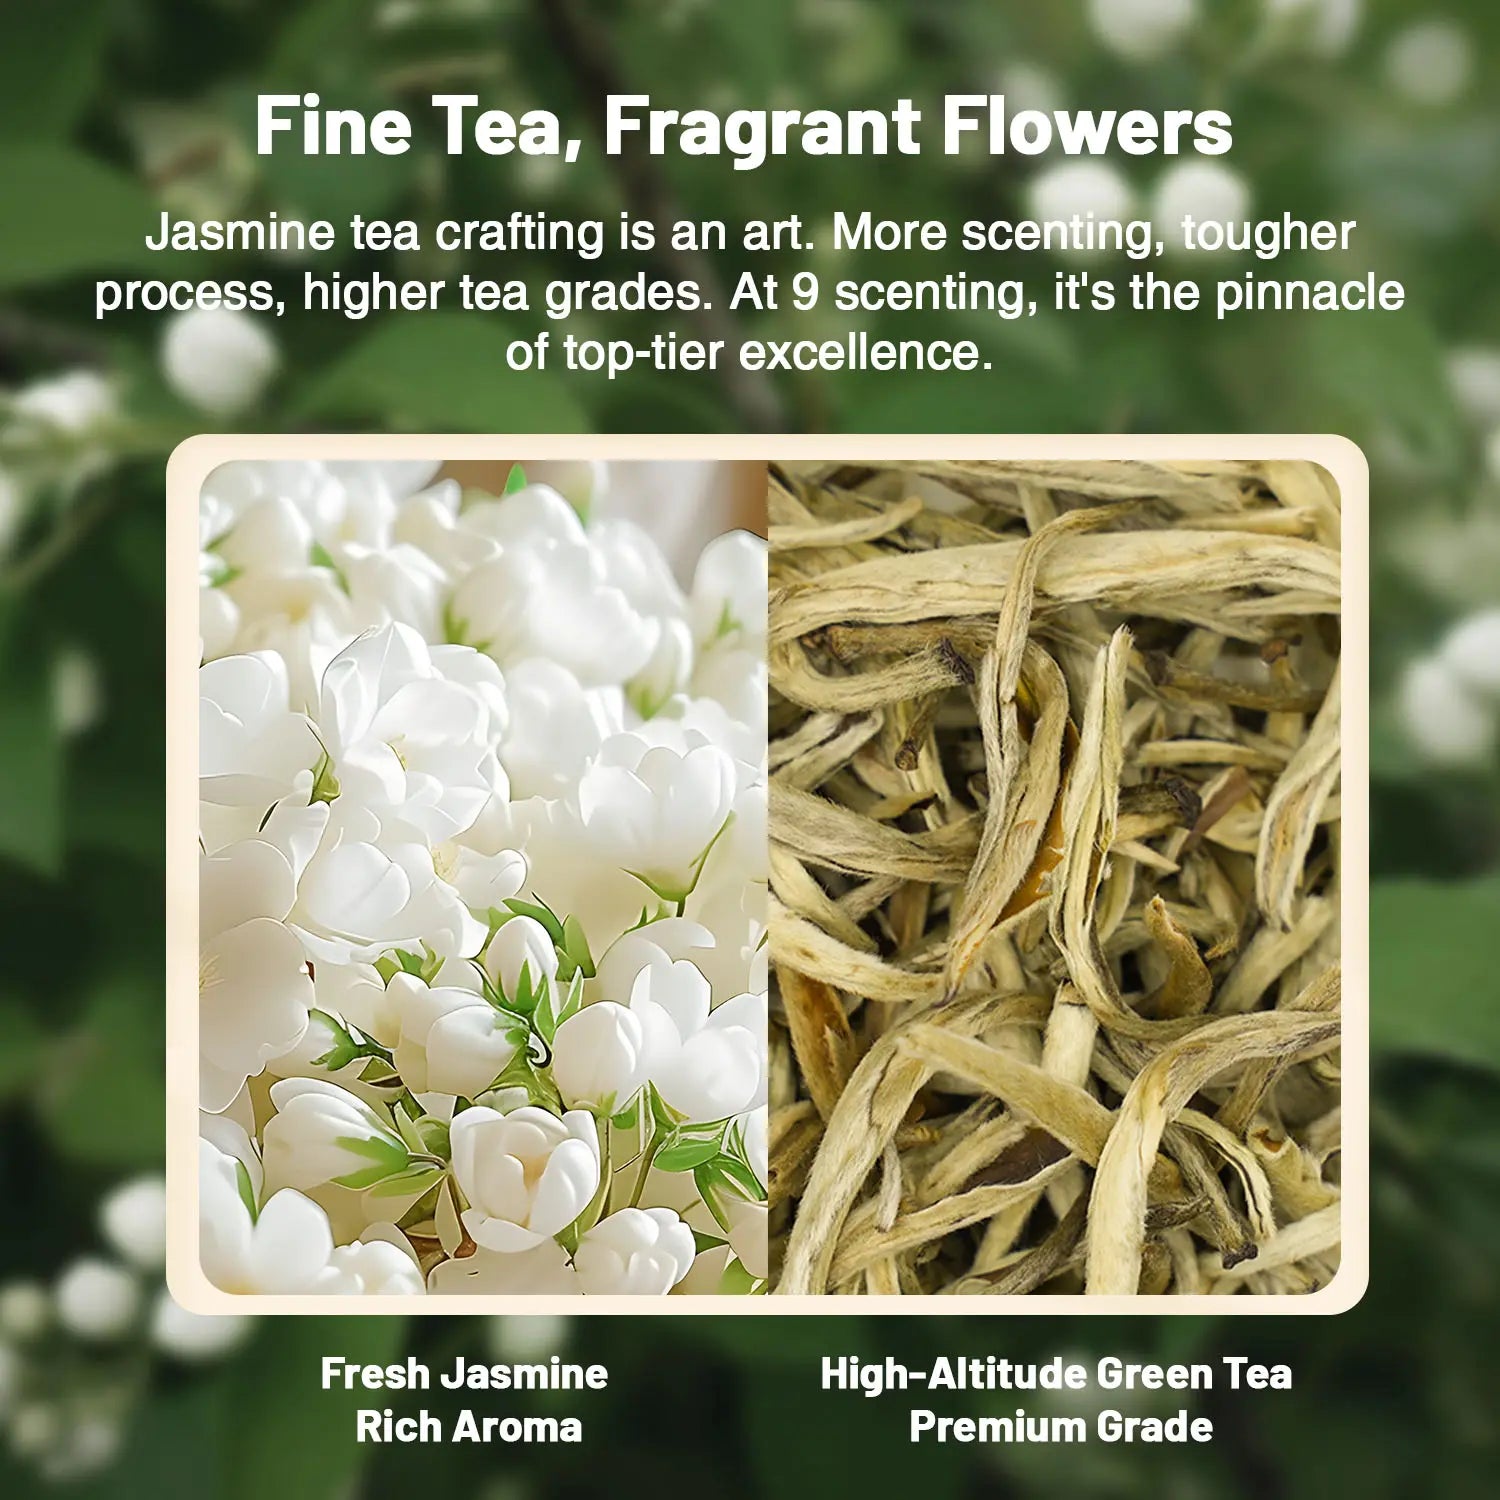 What is the scenting of jasmine tea